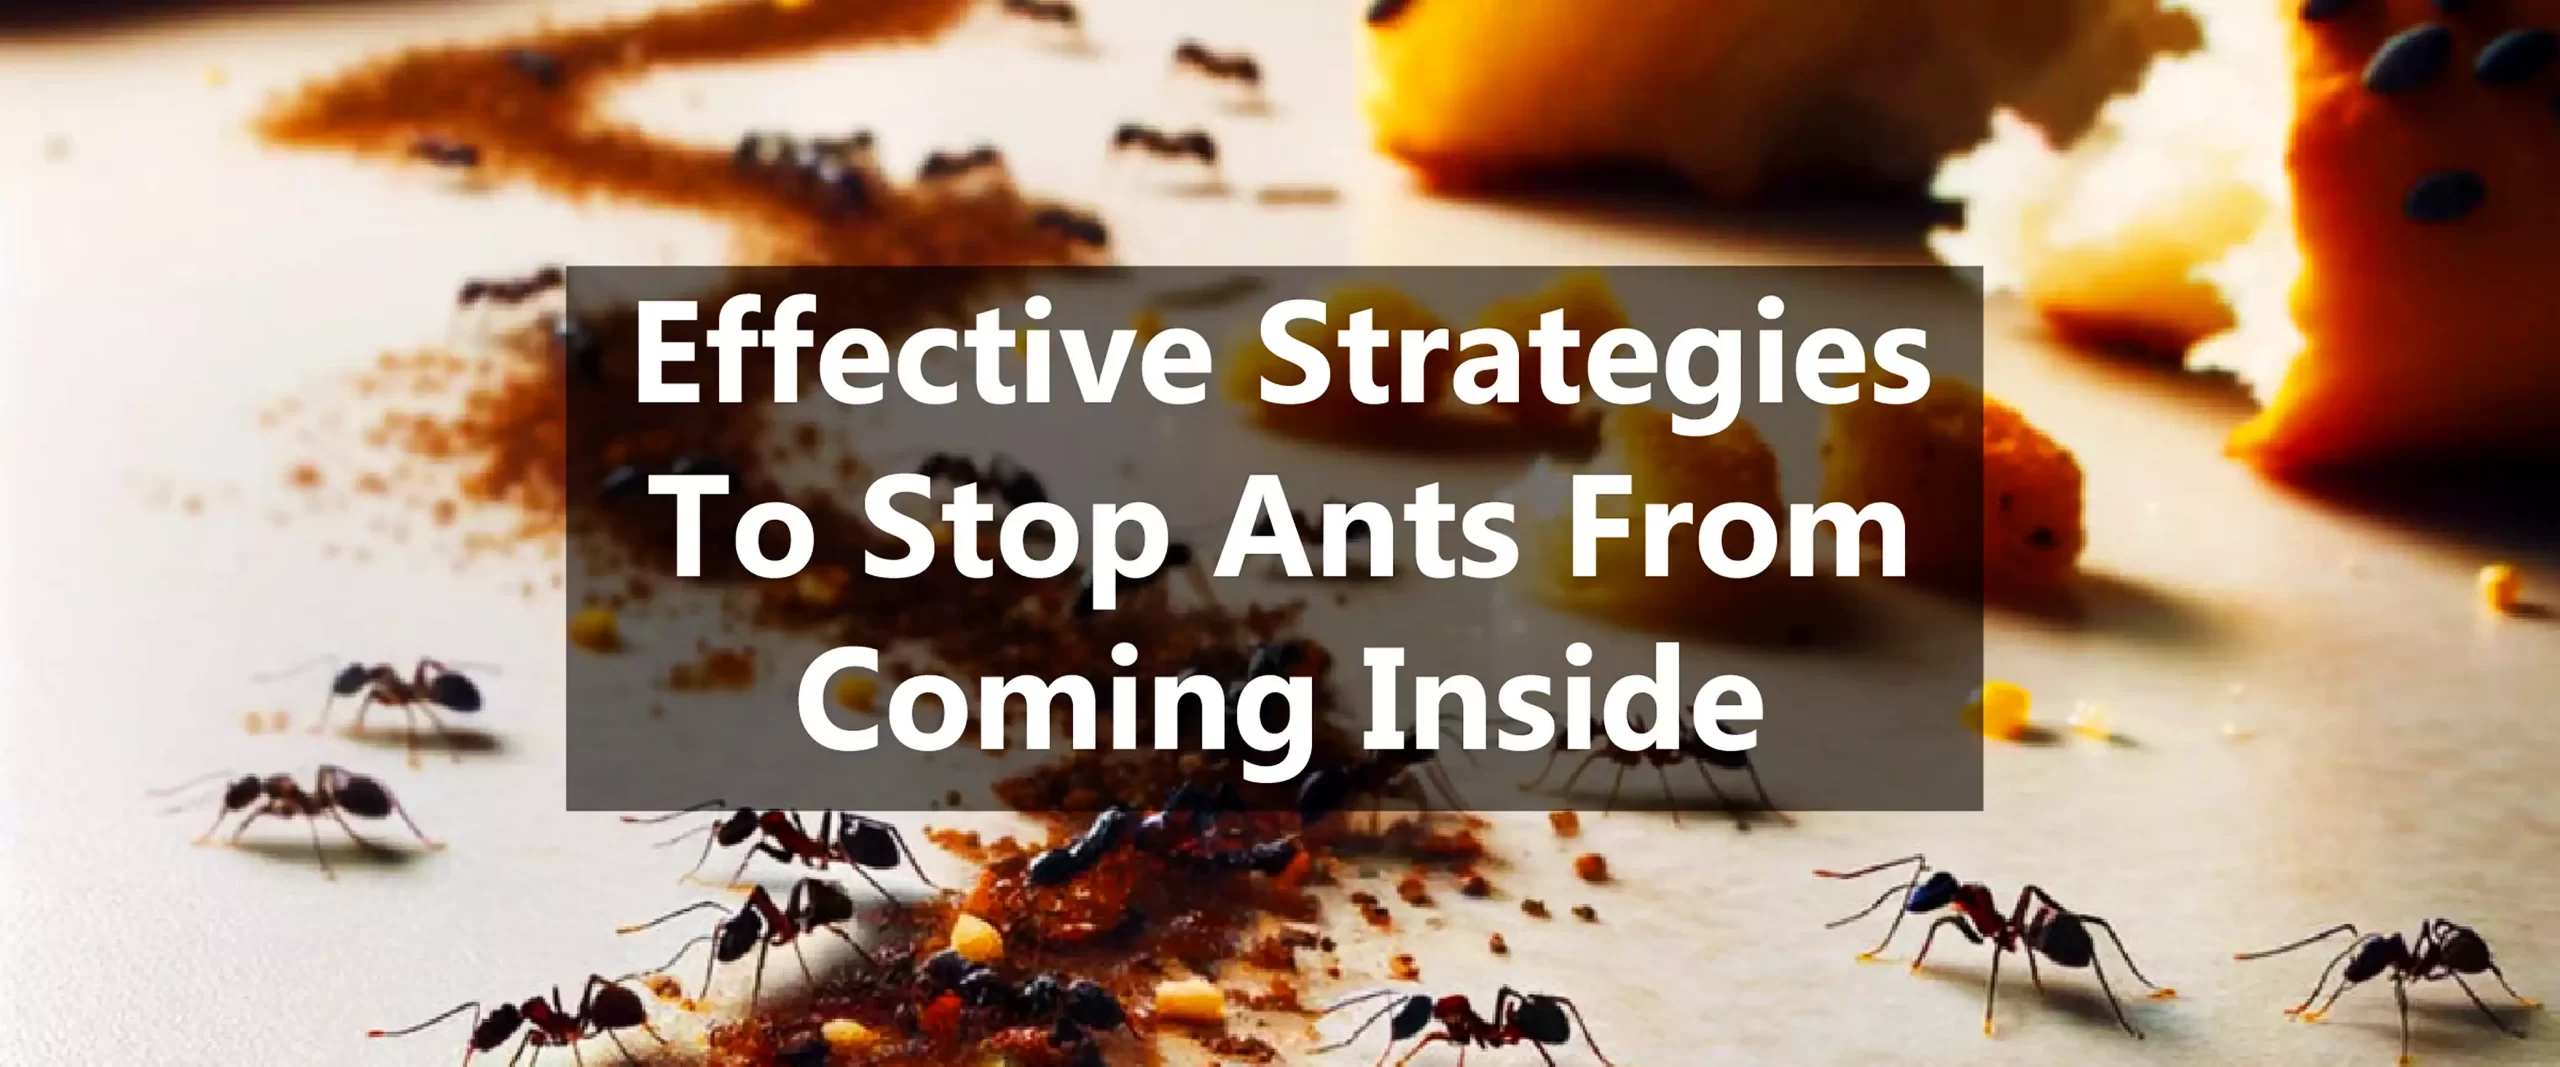 Keep your home Ant-free